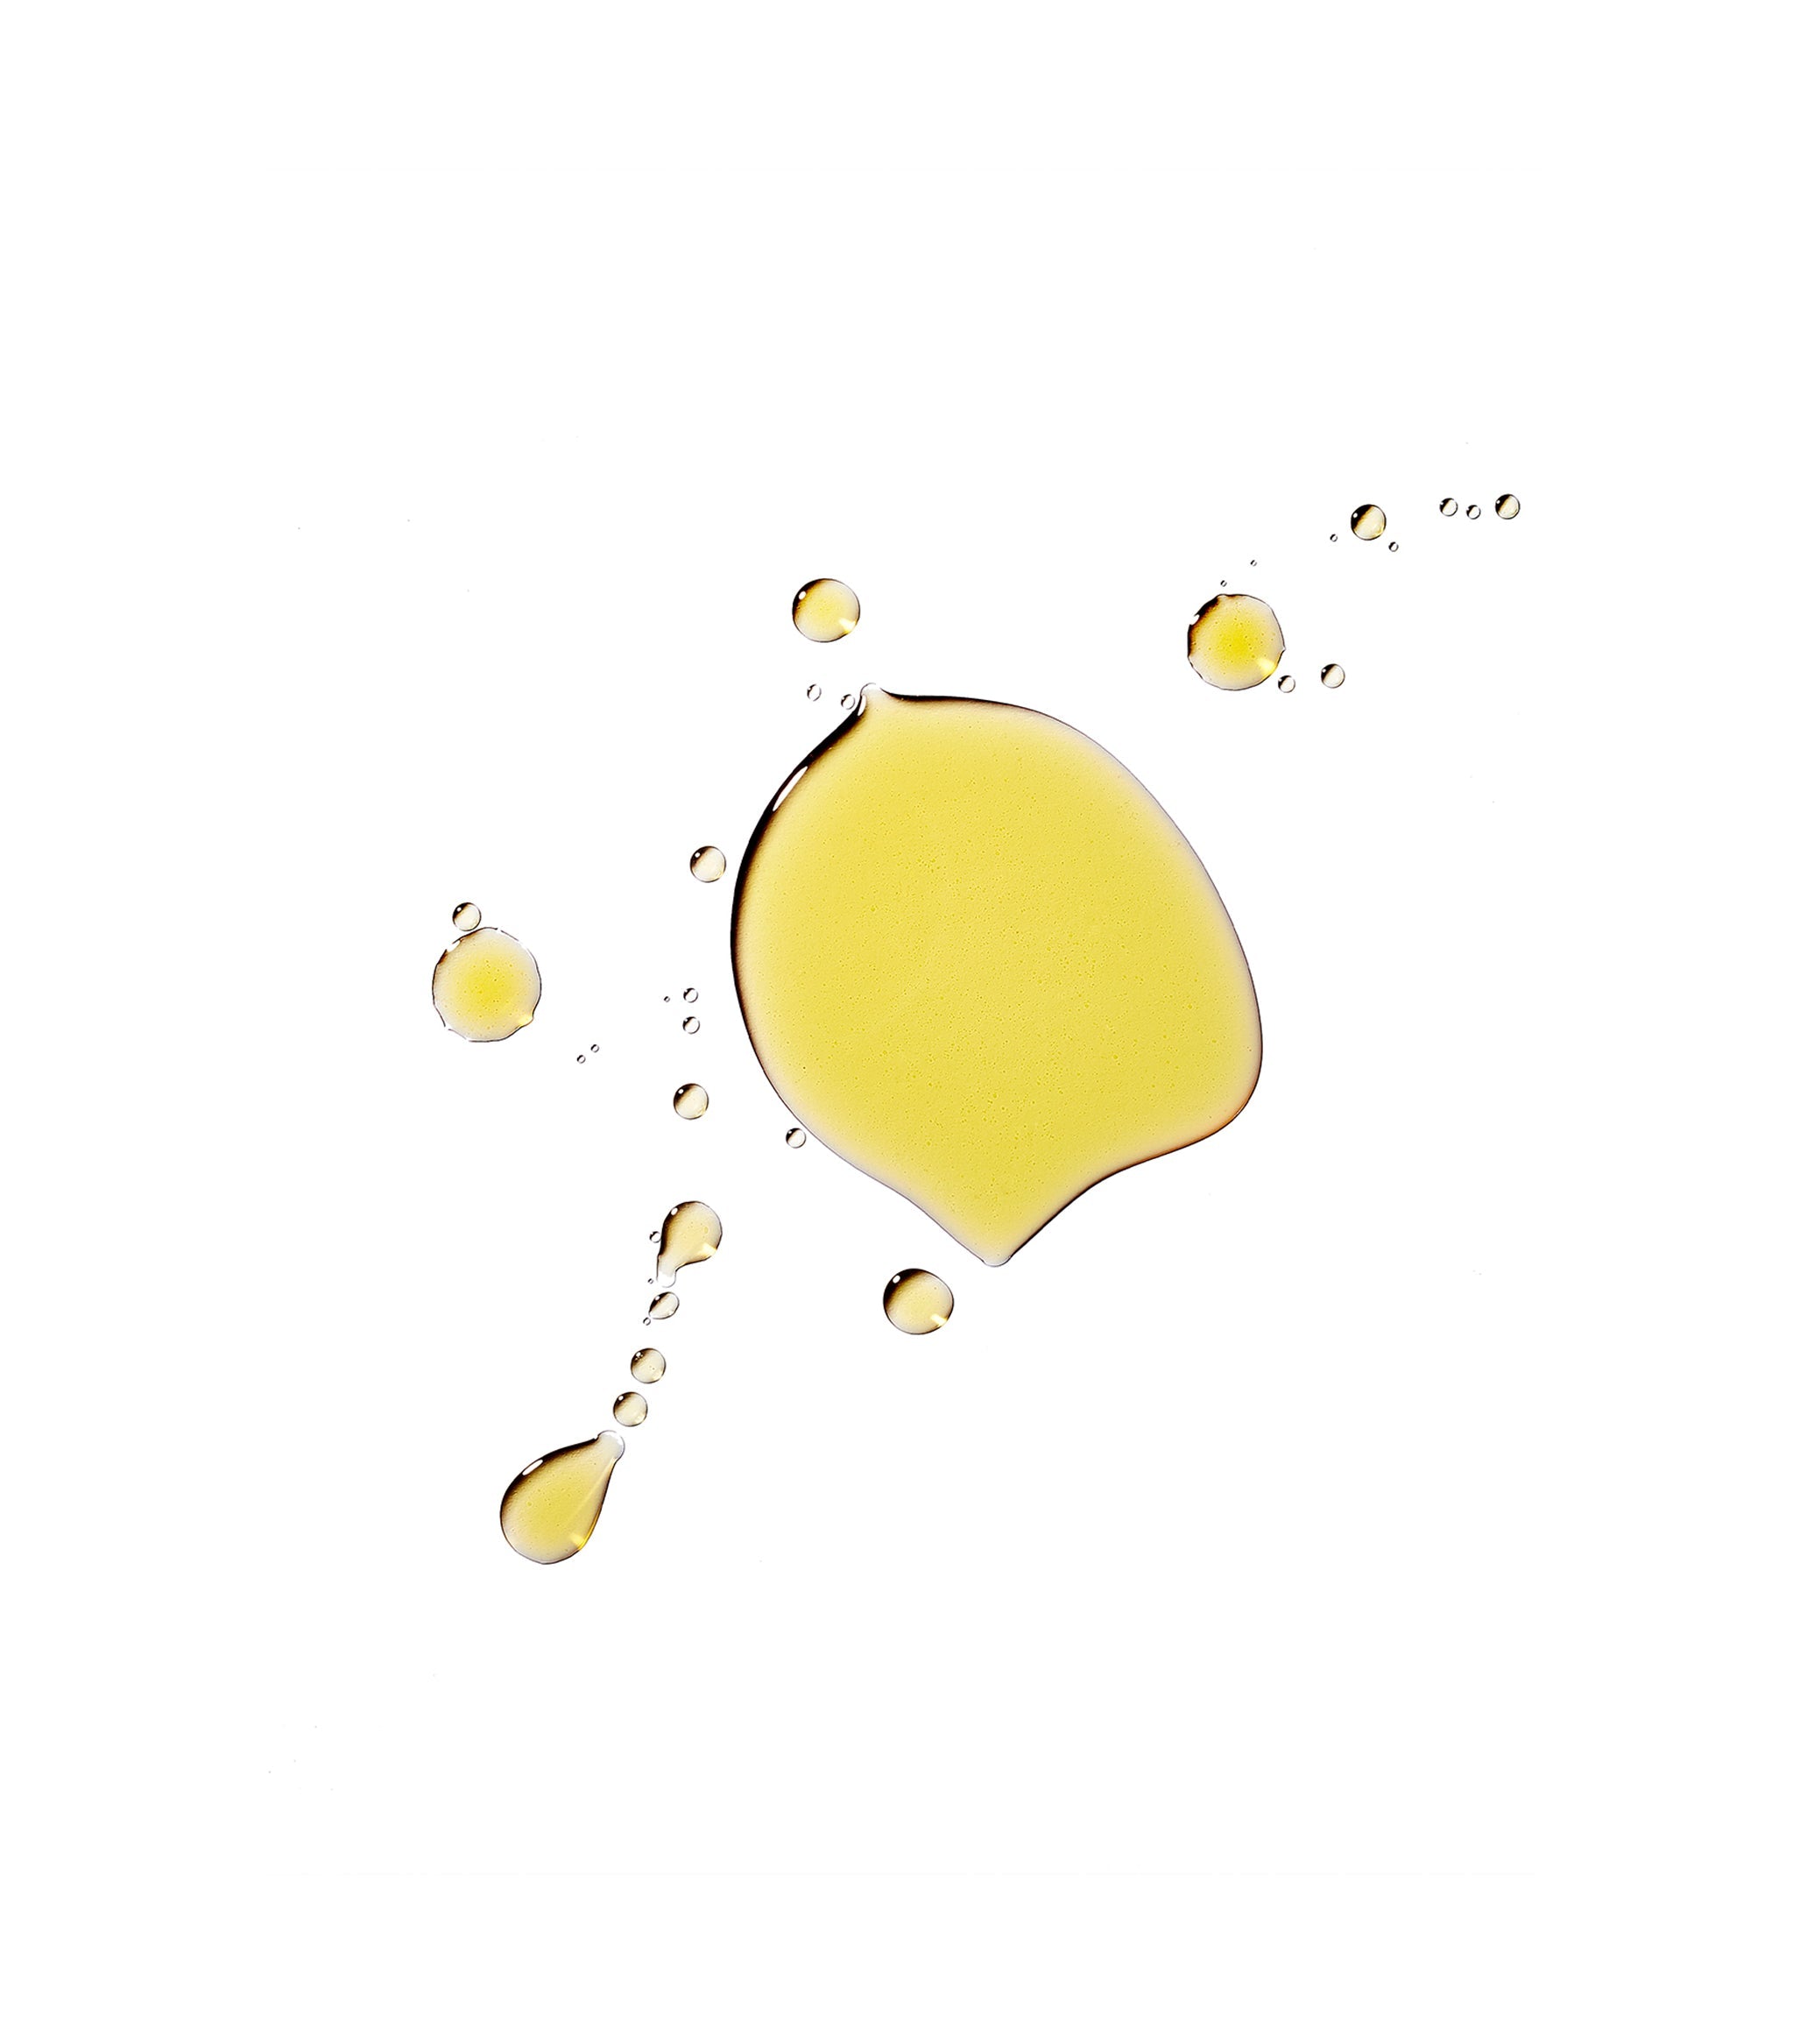 Image of a drop of oil on a white background.